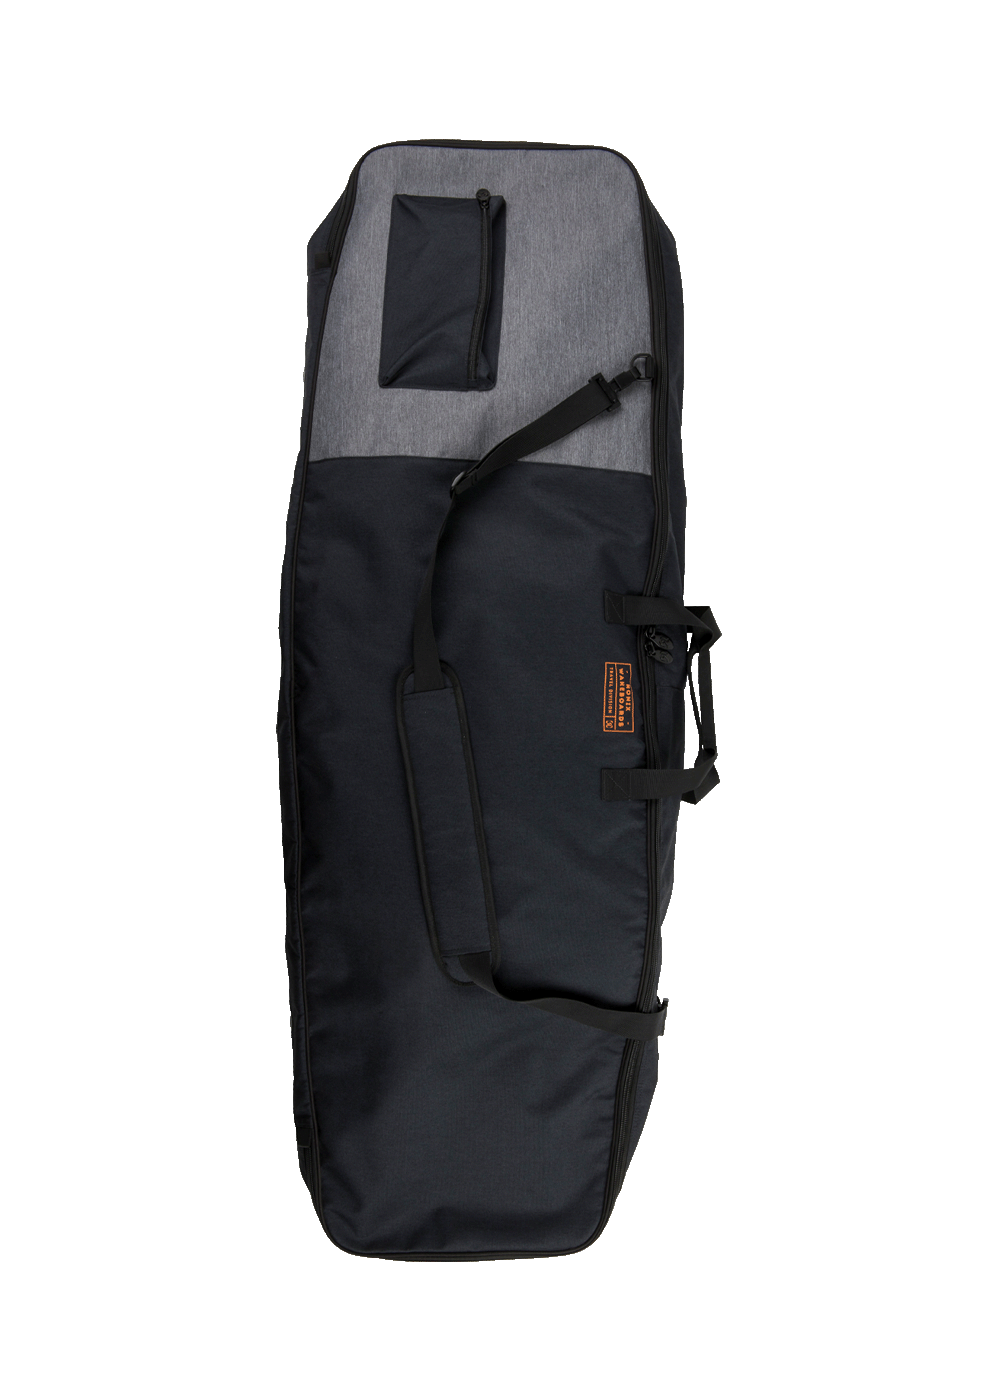 Ronix Collateral Non-Padded Wake Bag